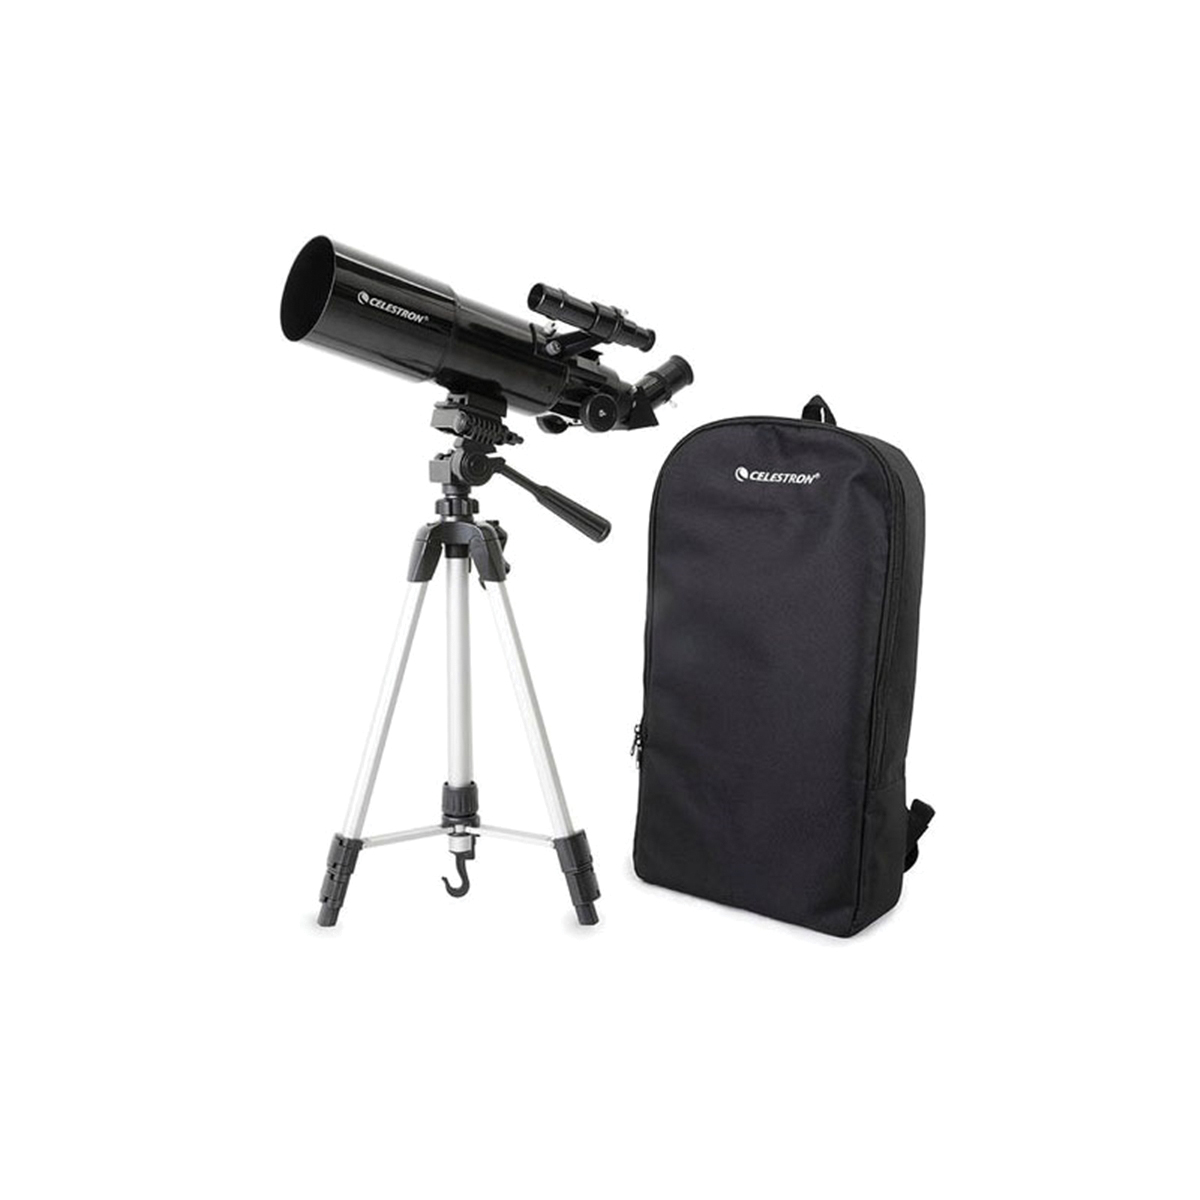 CELESTRON Travel Scope 80 Series 22030 Telescope with Smartphone Adapter, 3.1 in Aperture, 15.74 in L Focal - 4